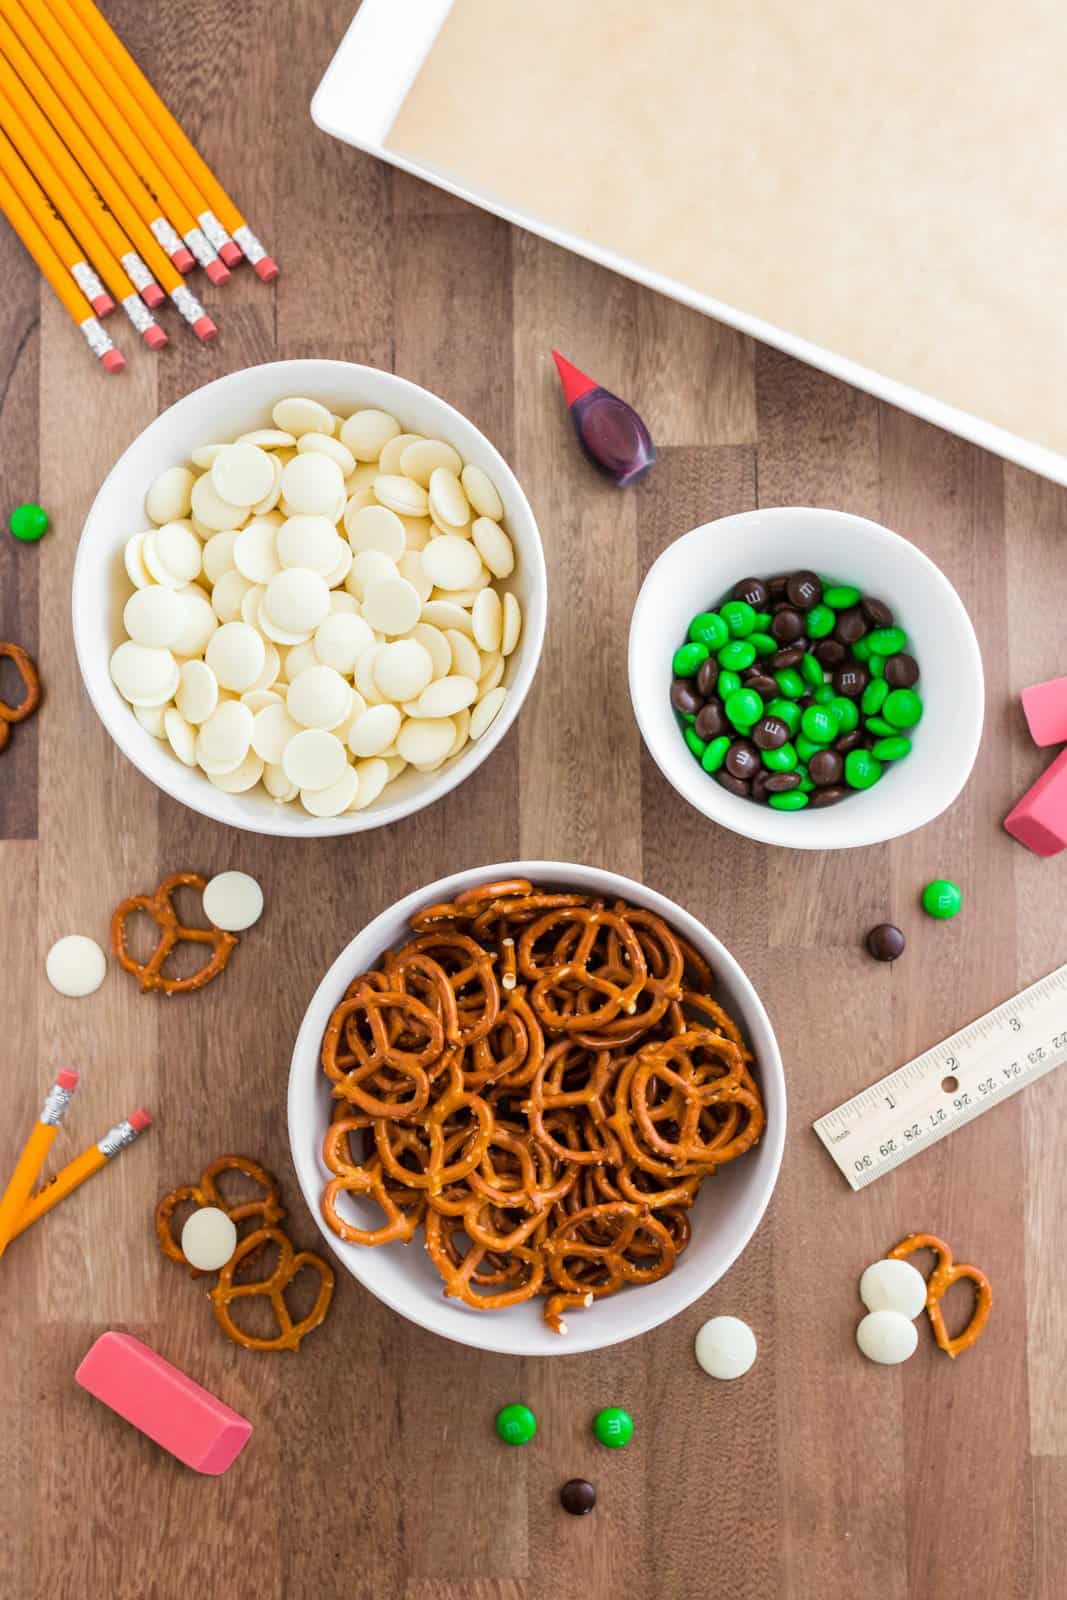 Ingredients needed: white melting chocolate, red food coloring, pretzel twists and green and brown M&Ms.